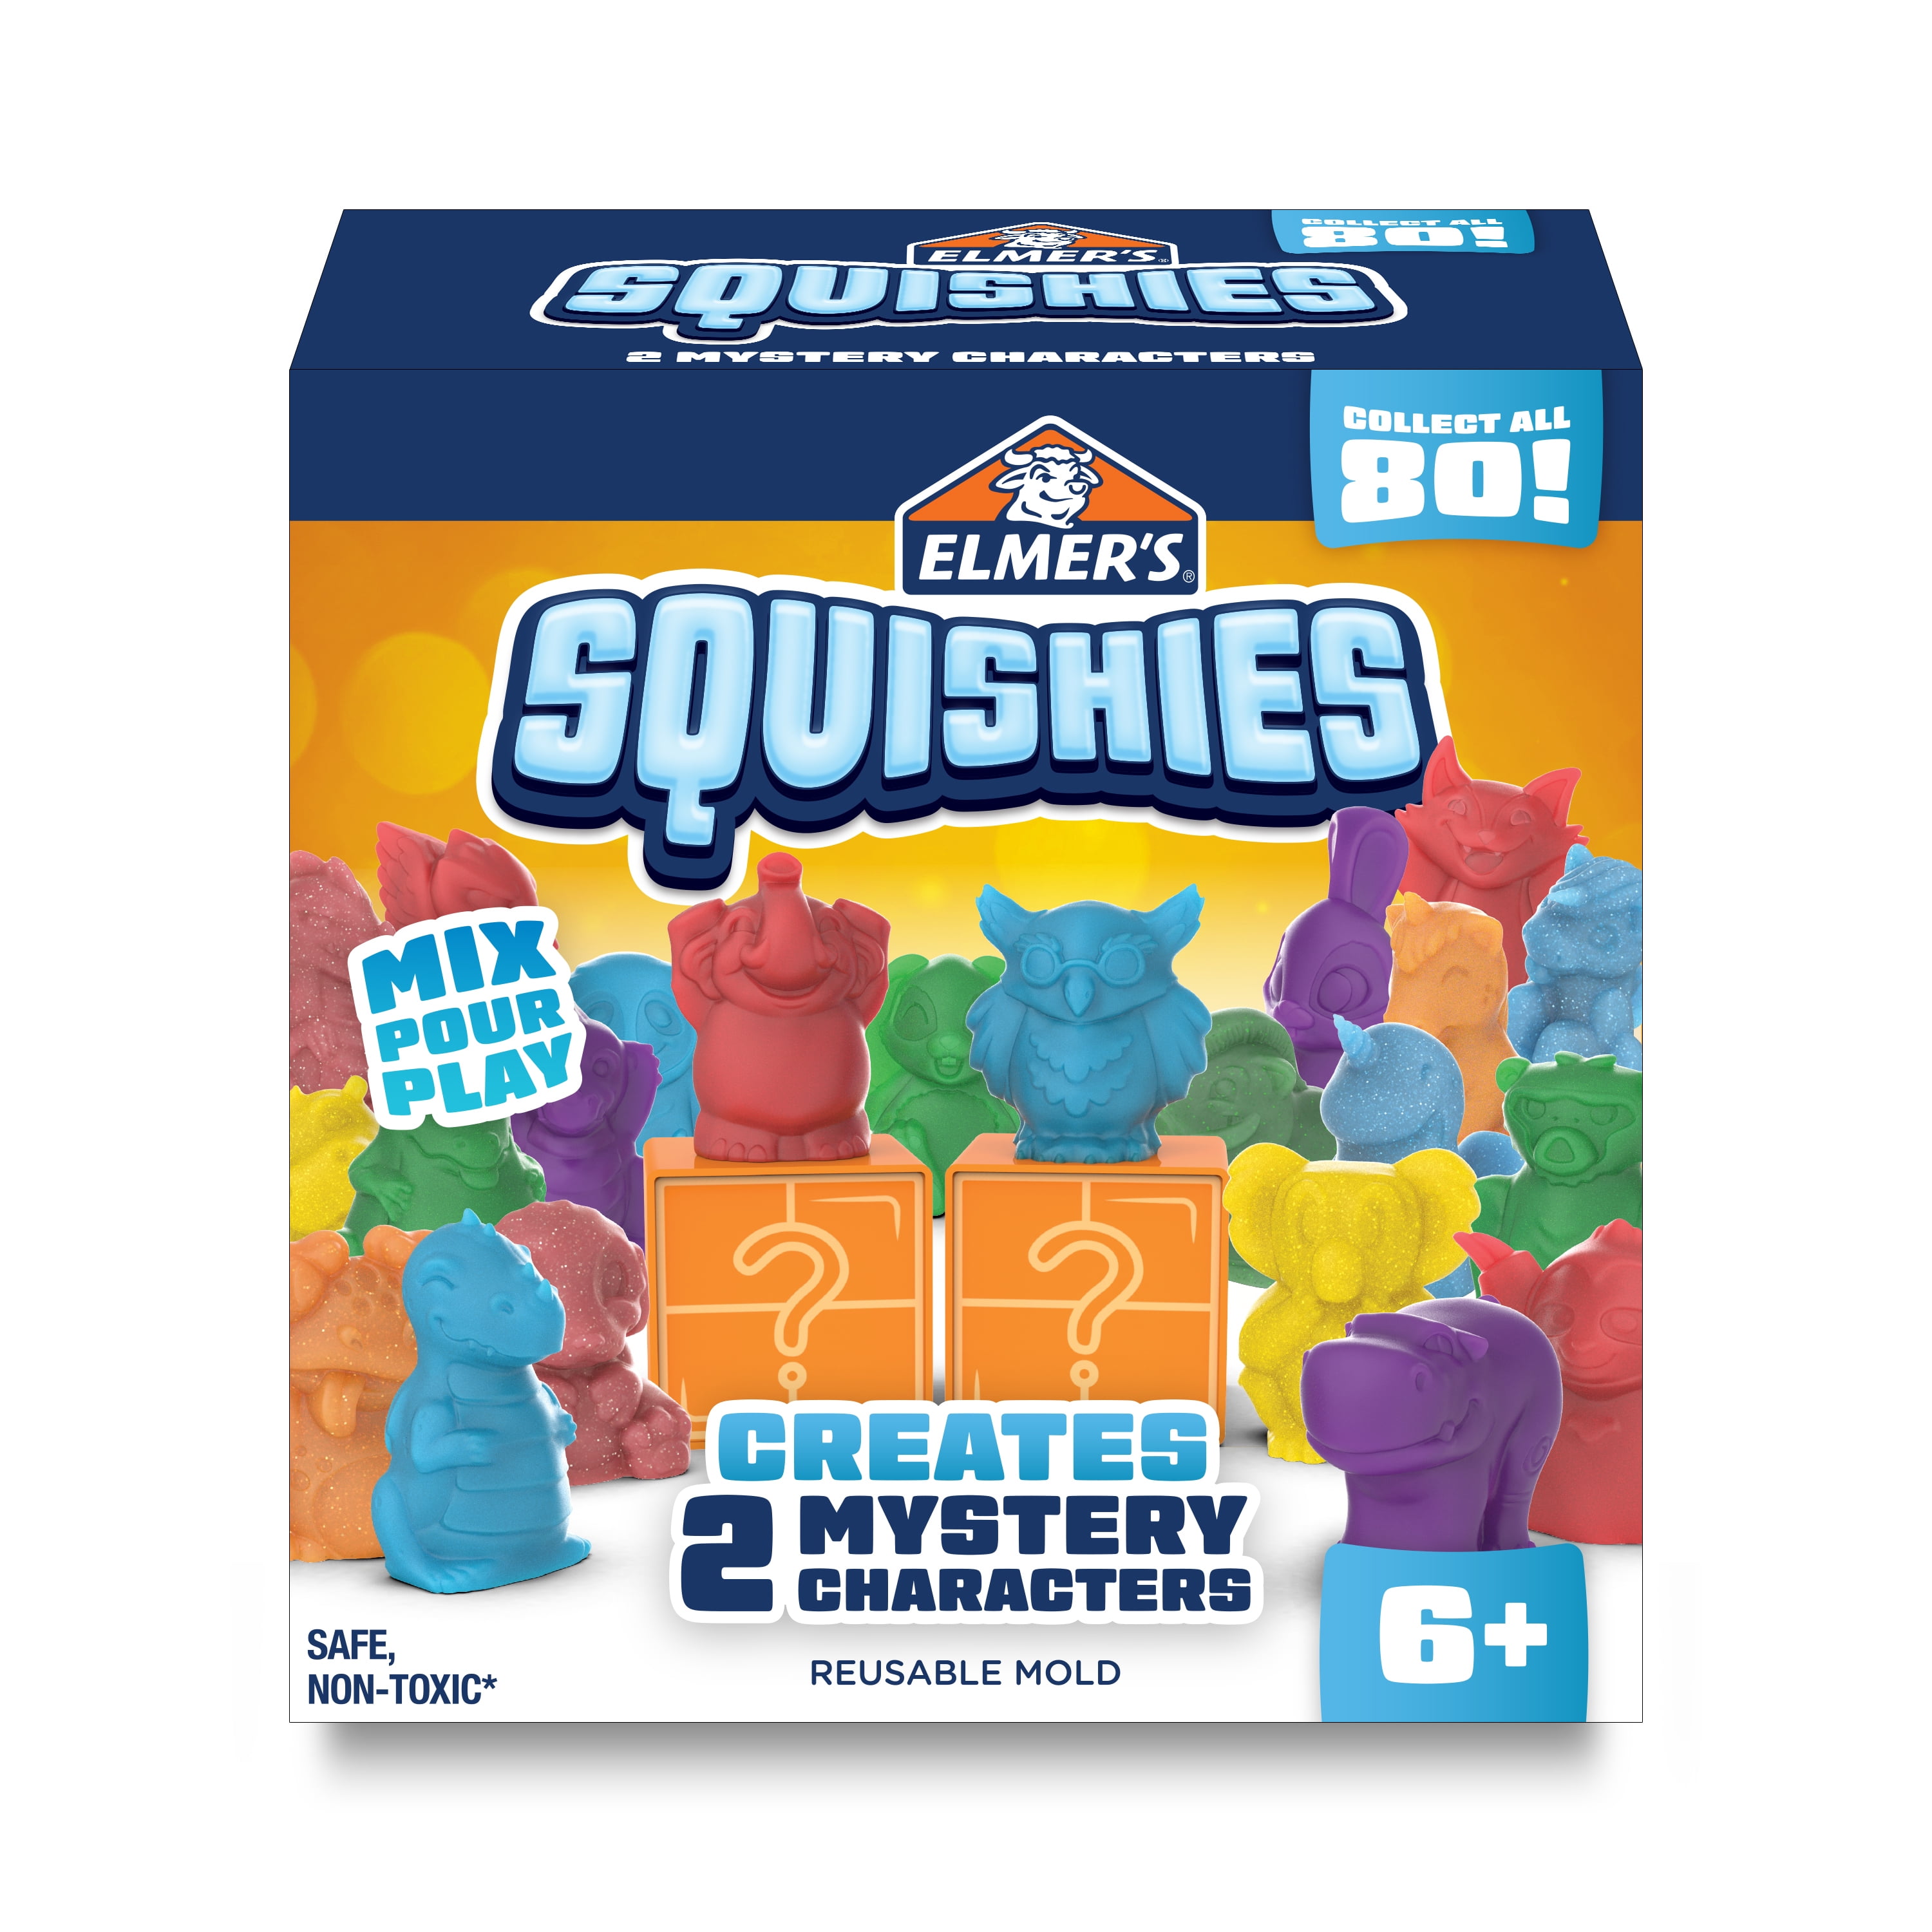 Sudan Skubbe Spytte ud Elmer's Squishies DIY Squishy Toy Kit, 2 Count Mystery Characters -  Walmart.com